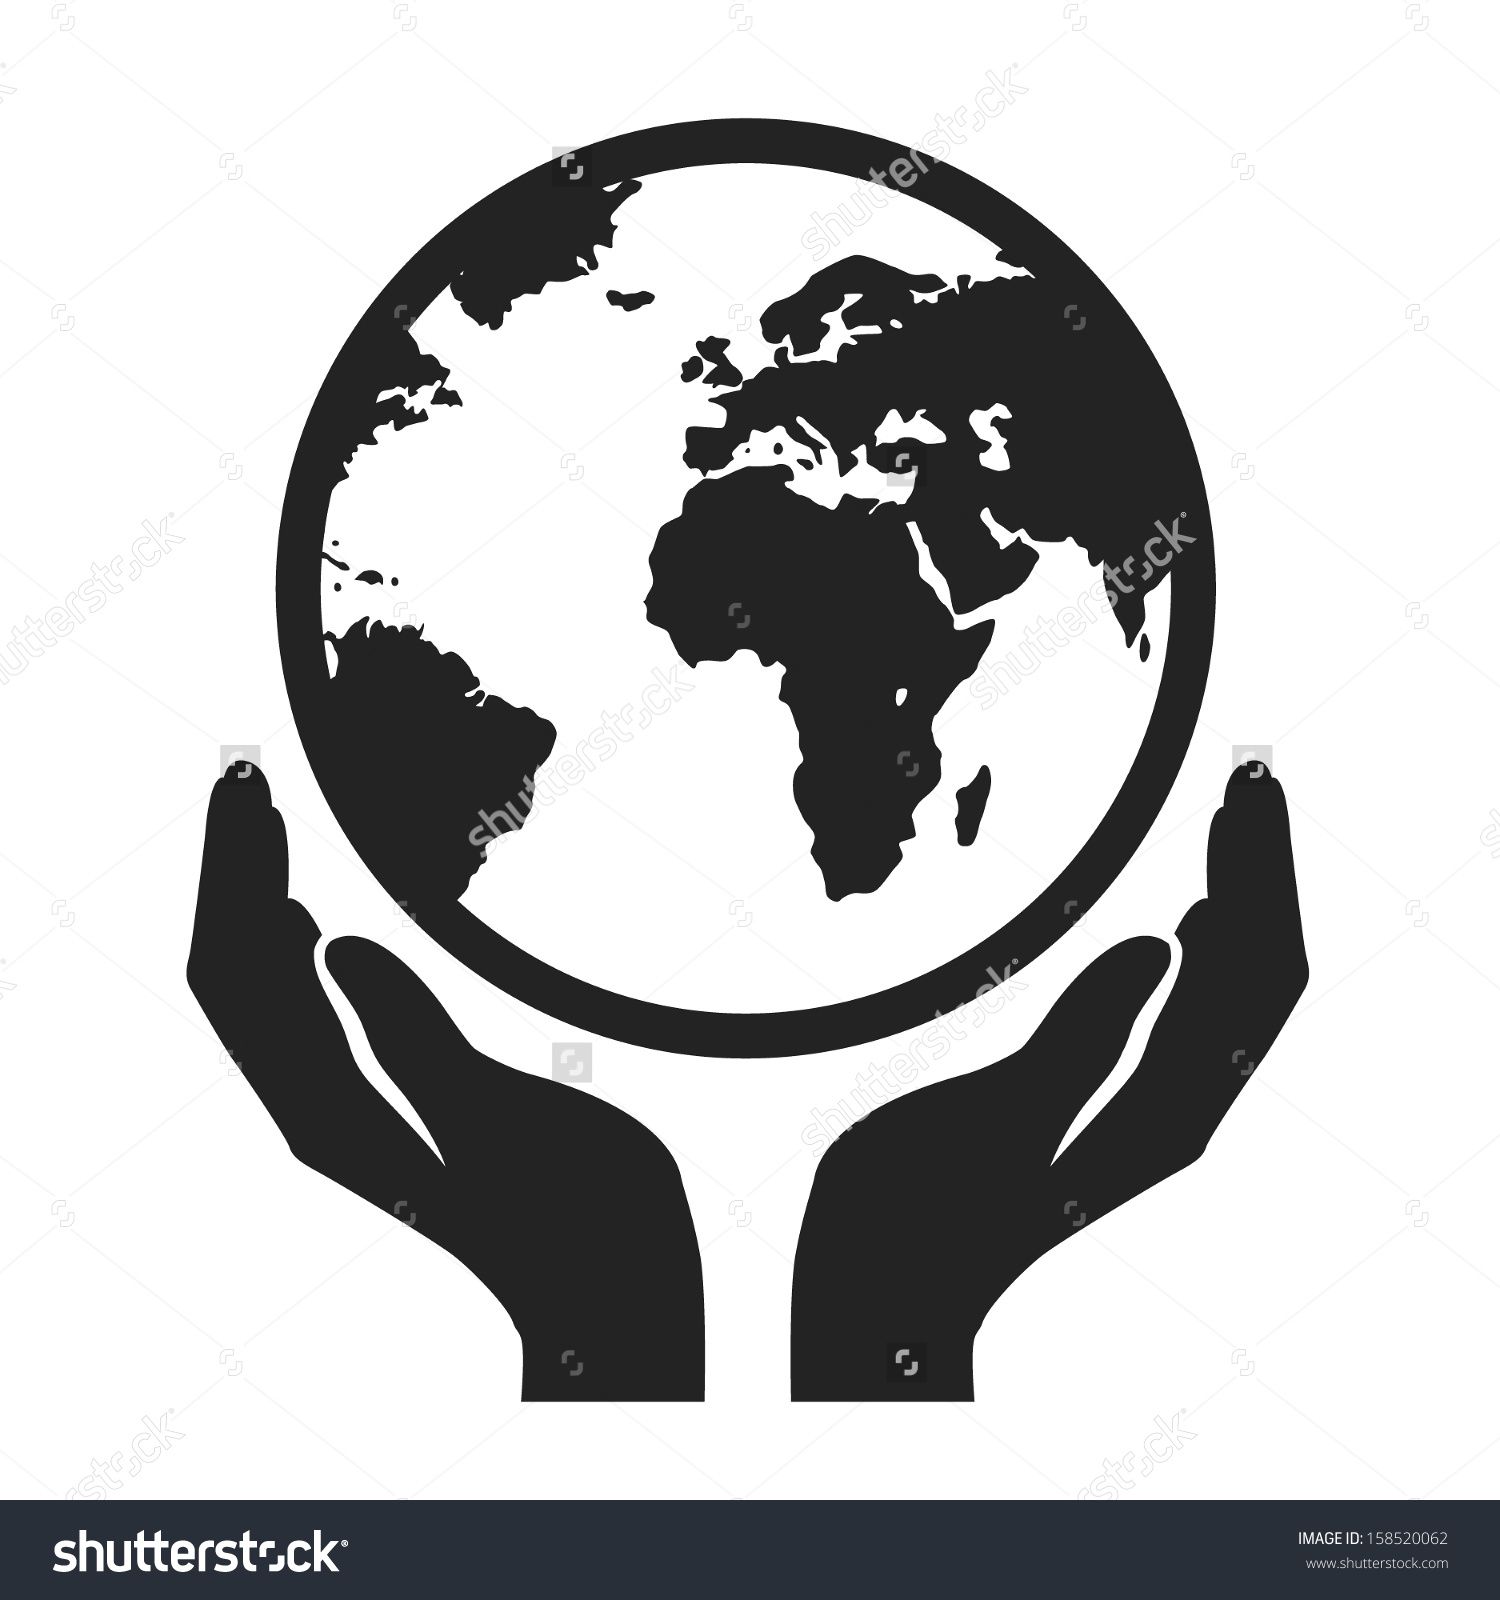 Clipart globe hands holding. Pin by pam pilger